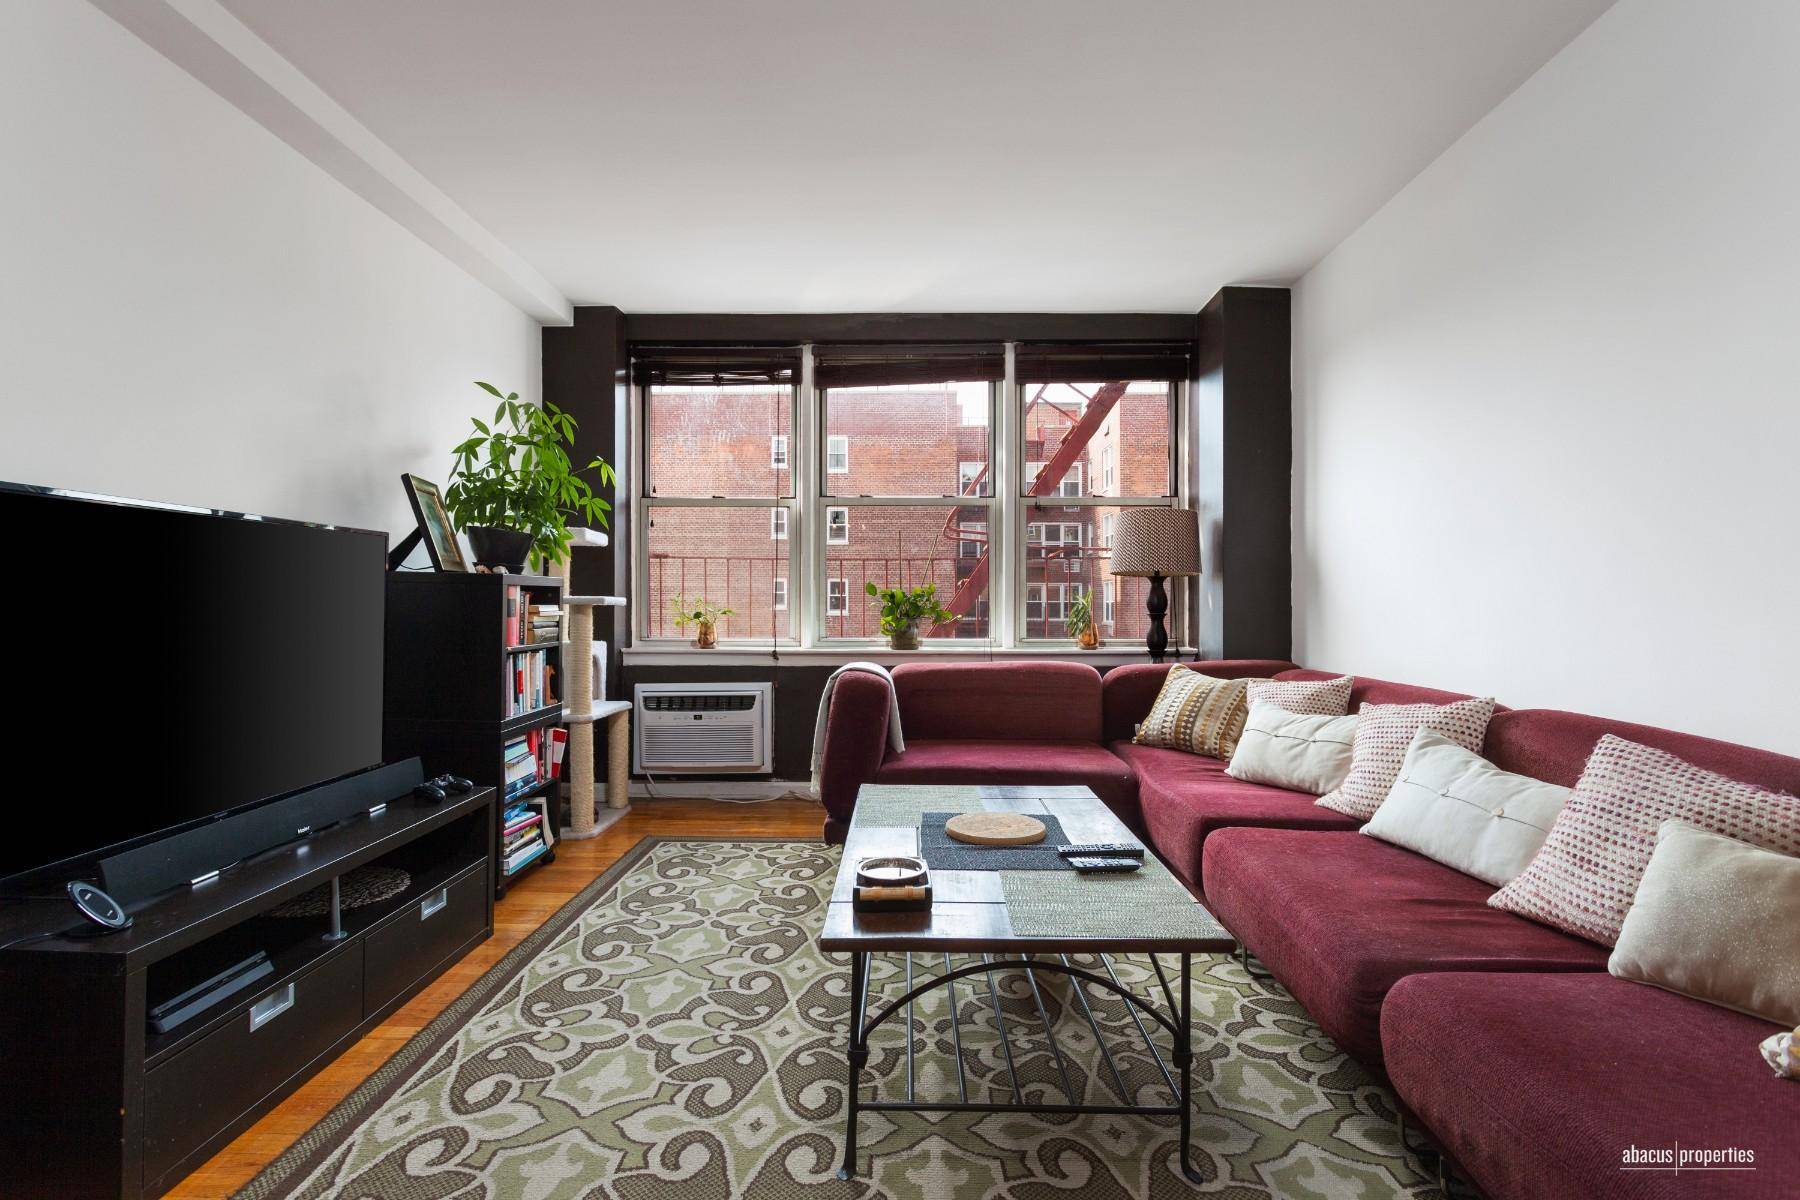 Tired of the ordinary ? Then this corner charmer of an apartment is for you.